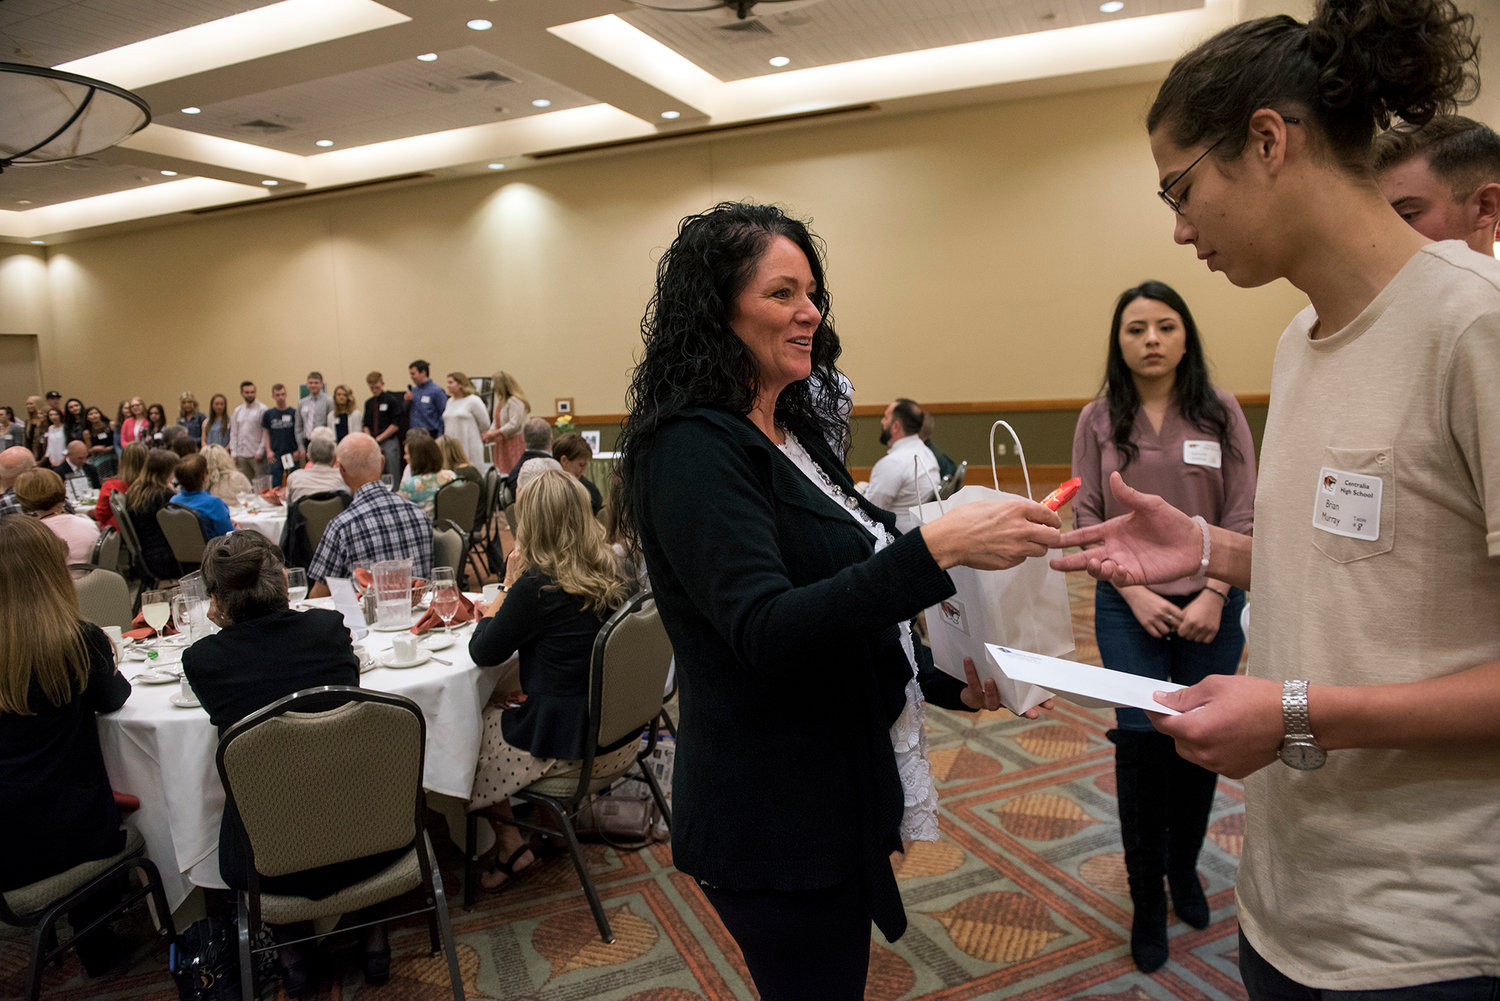 The top 25 students from Centralia High School are handed gift bags and their "first 100 Grand" according to Alicia Bull, the Centralia-Chehalis Chamber of Commerce executive director and the emcee of the Rob Fuller Scholarship Lunch at the Great Wolf Lodge in Grand Mound on Monday, May 8, 2017.